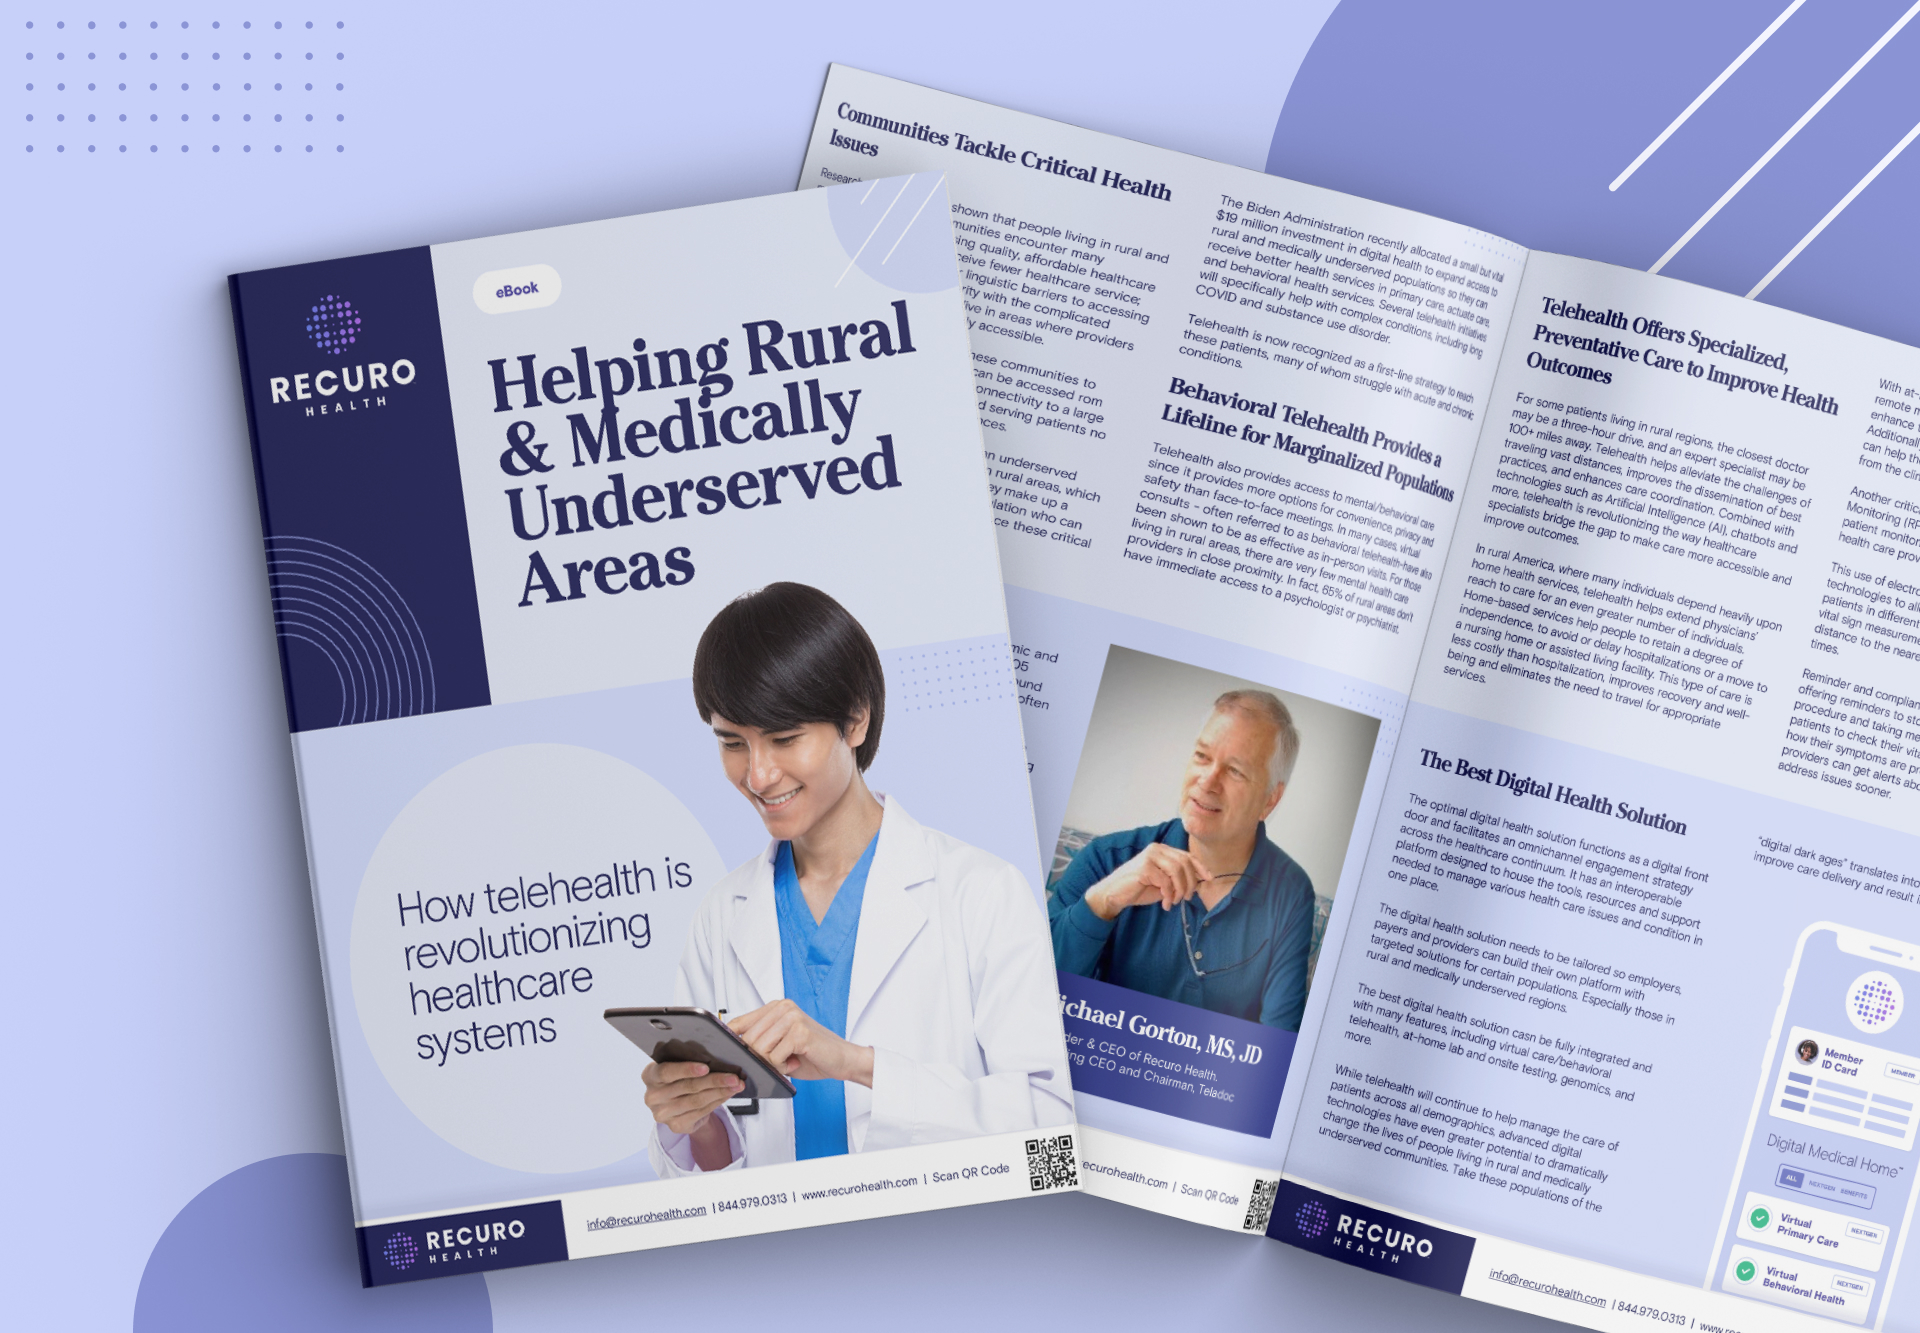 Telehealth Helps Rural and Medically Underserved Communities